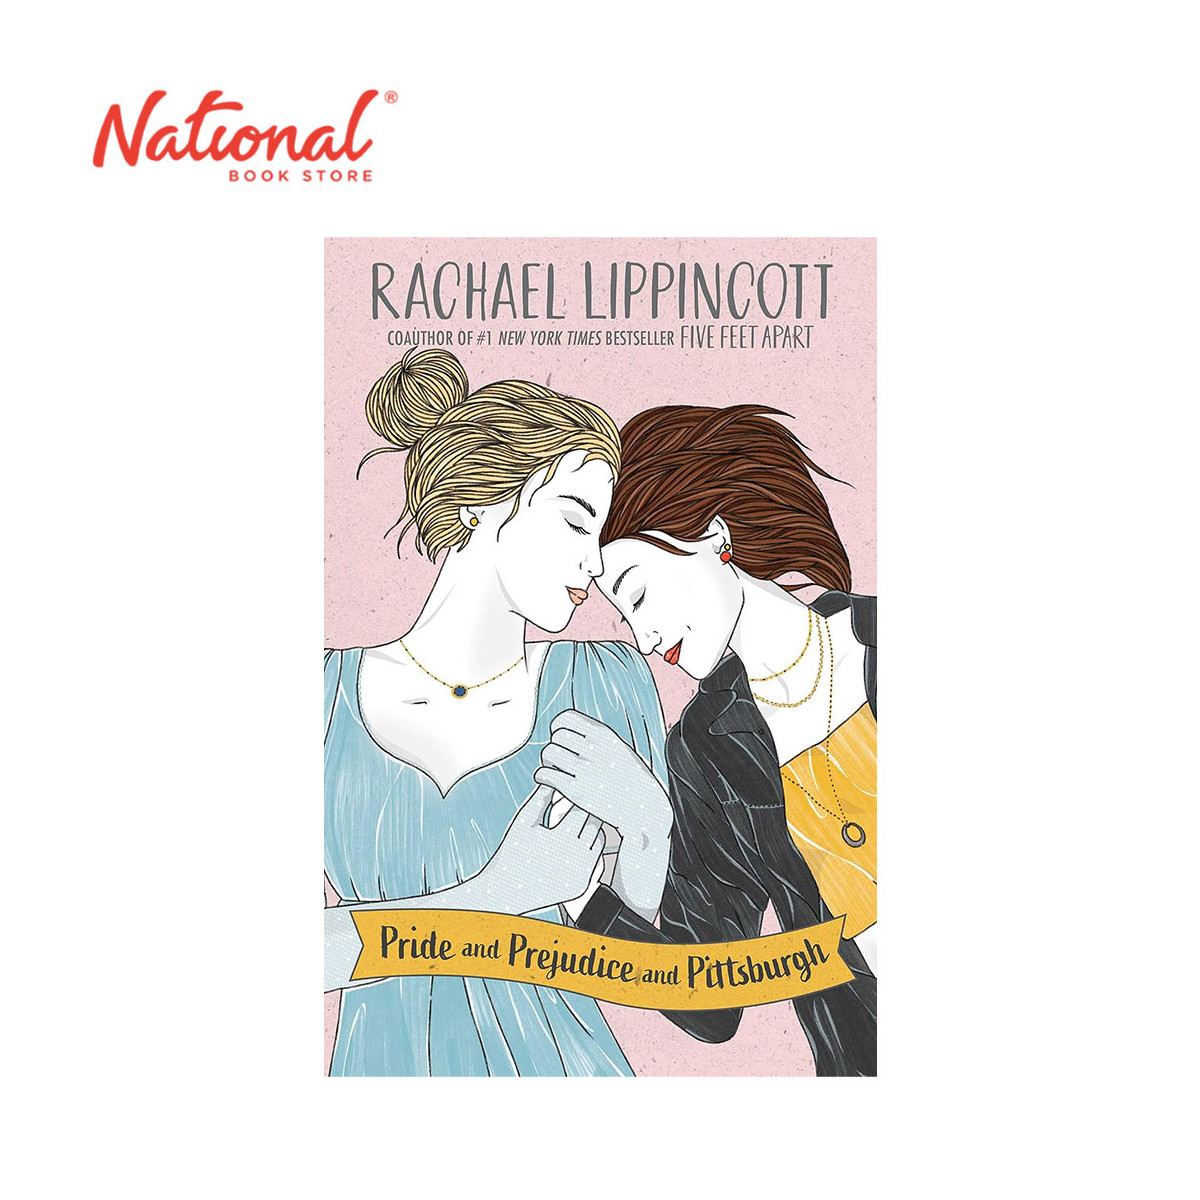 Pride And Prejudice And Pittsburgh by Rachael Lippincott - Trade Paperback - Teens Romance